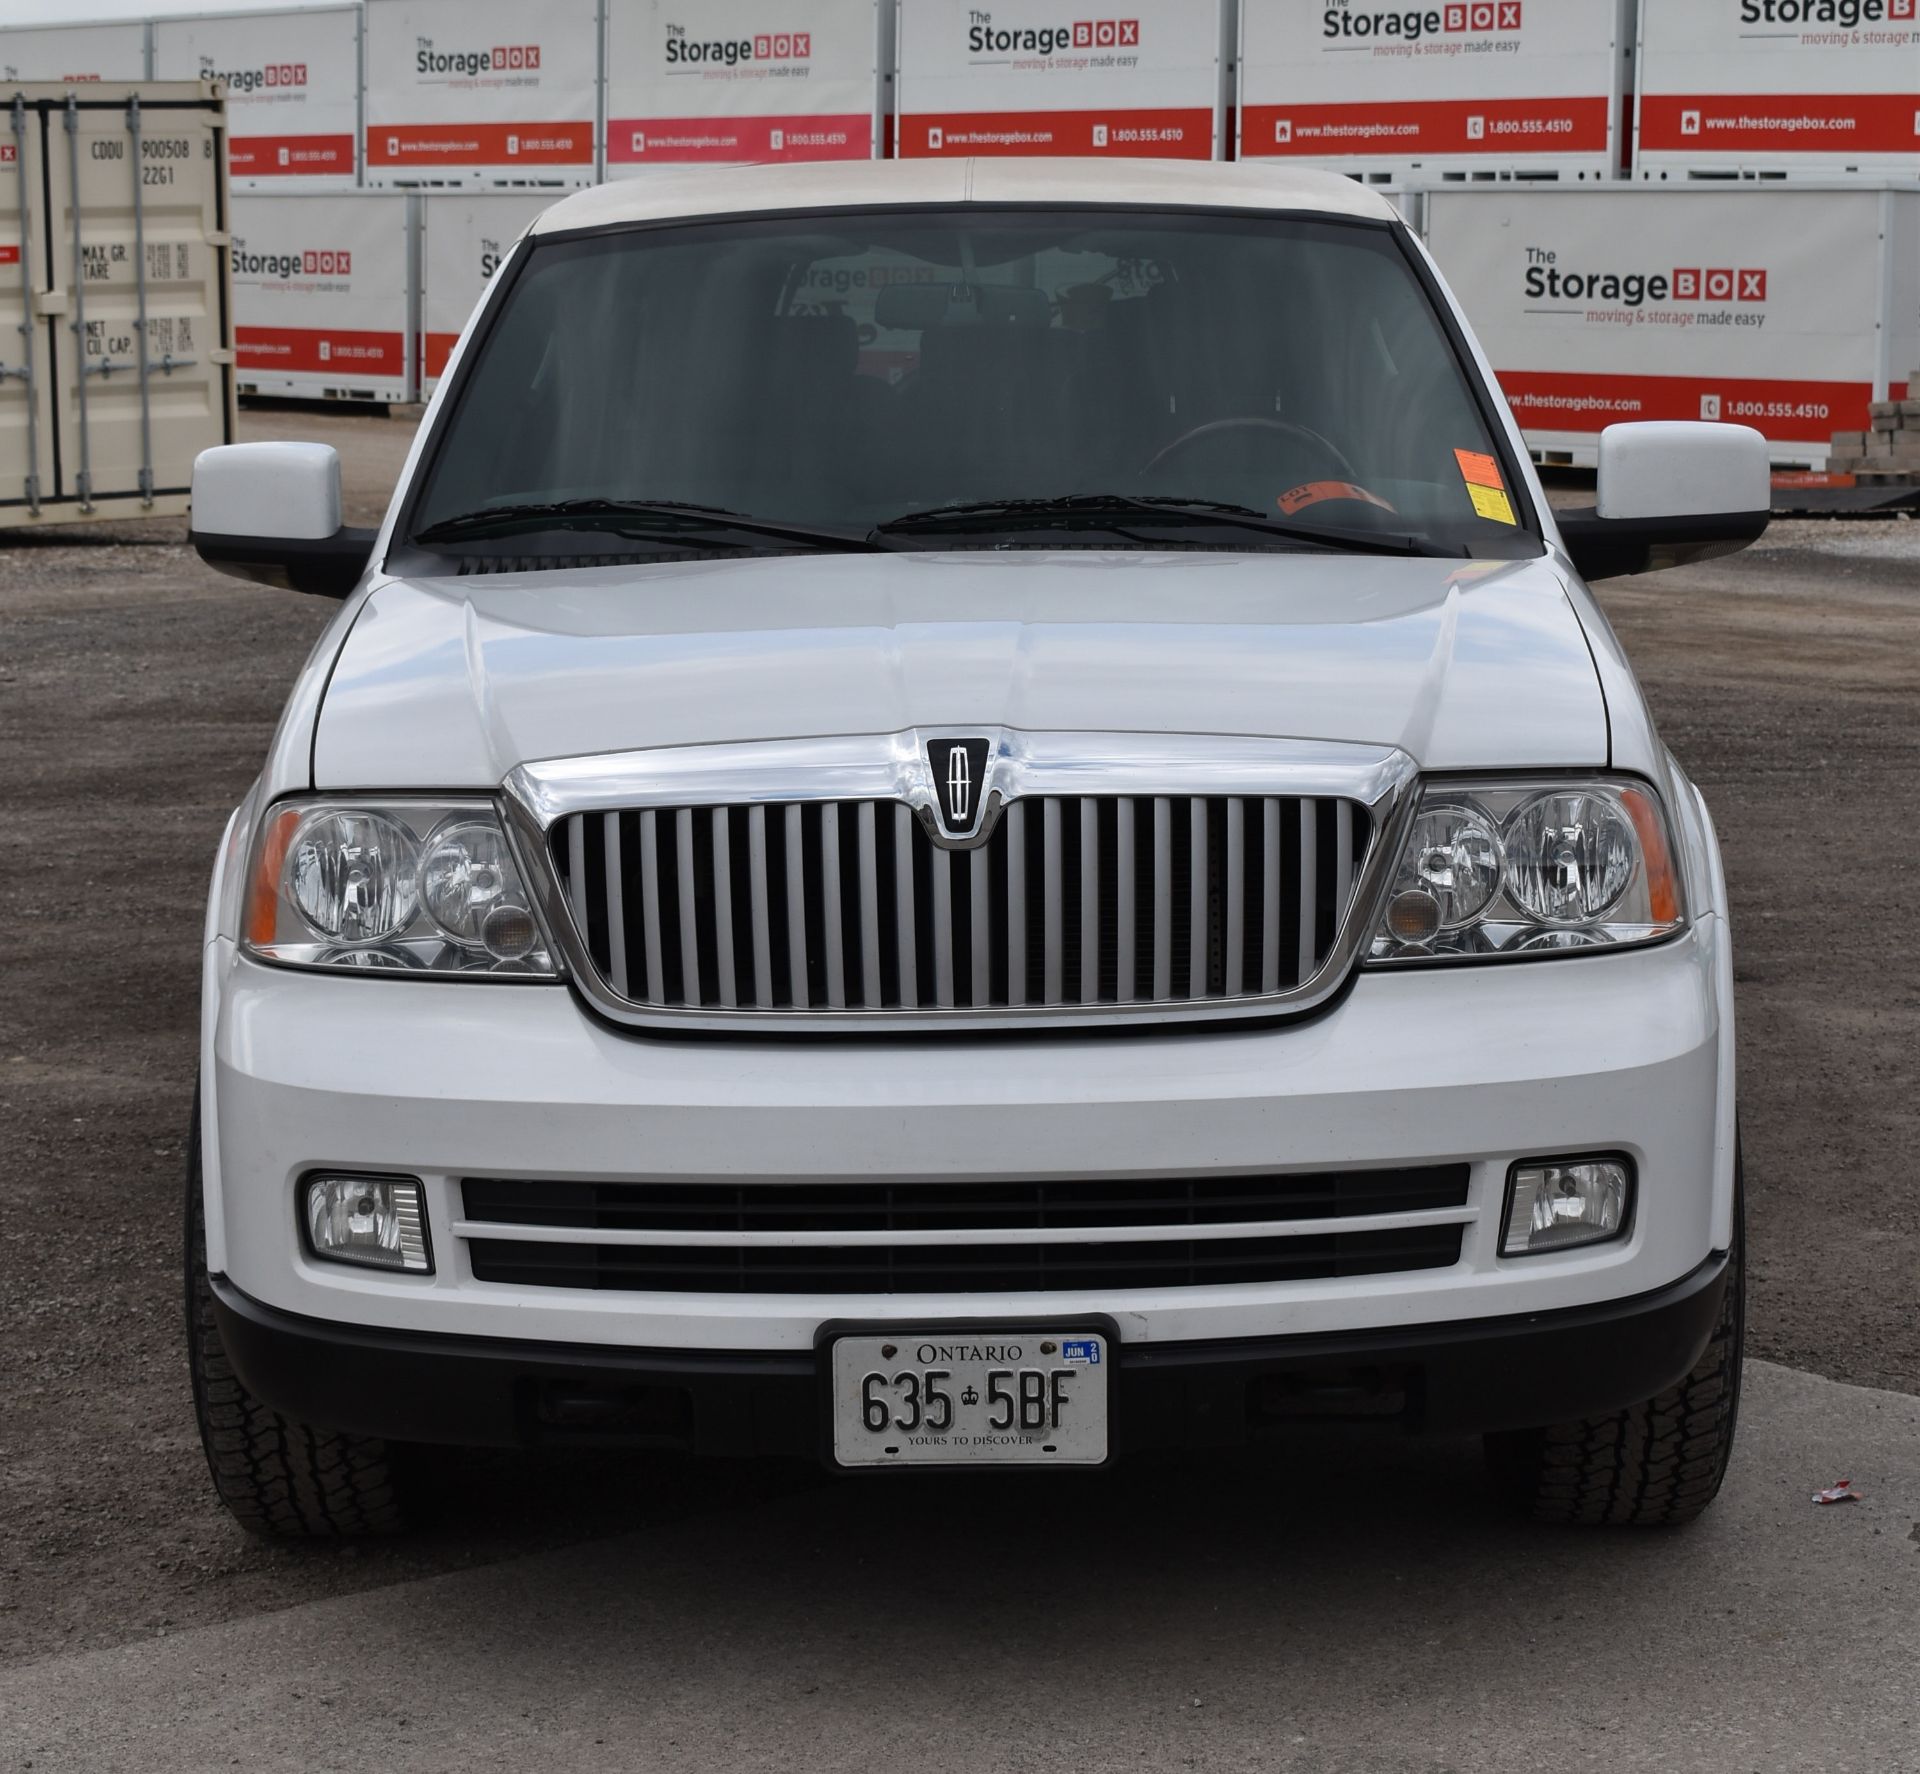 LINCOLN (2006) NAVIGATOR 14 PASSENGER STRETCH LIMOUSINE WITH 8 CYLINDER 5.4L GAS ENGINE, 219, - Image 2 of 21